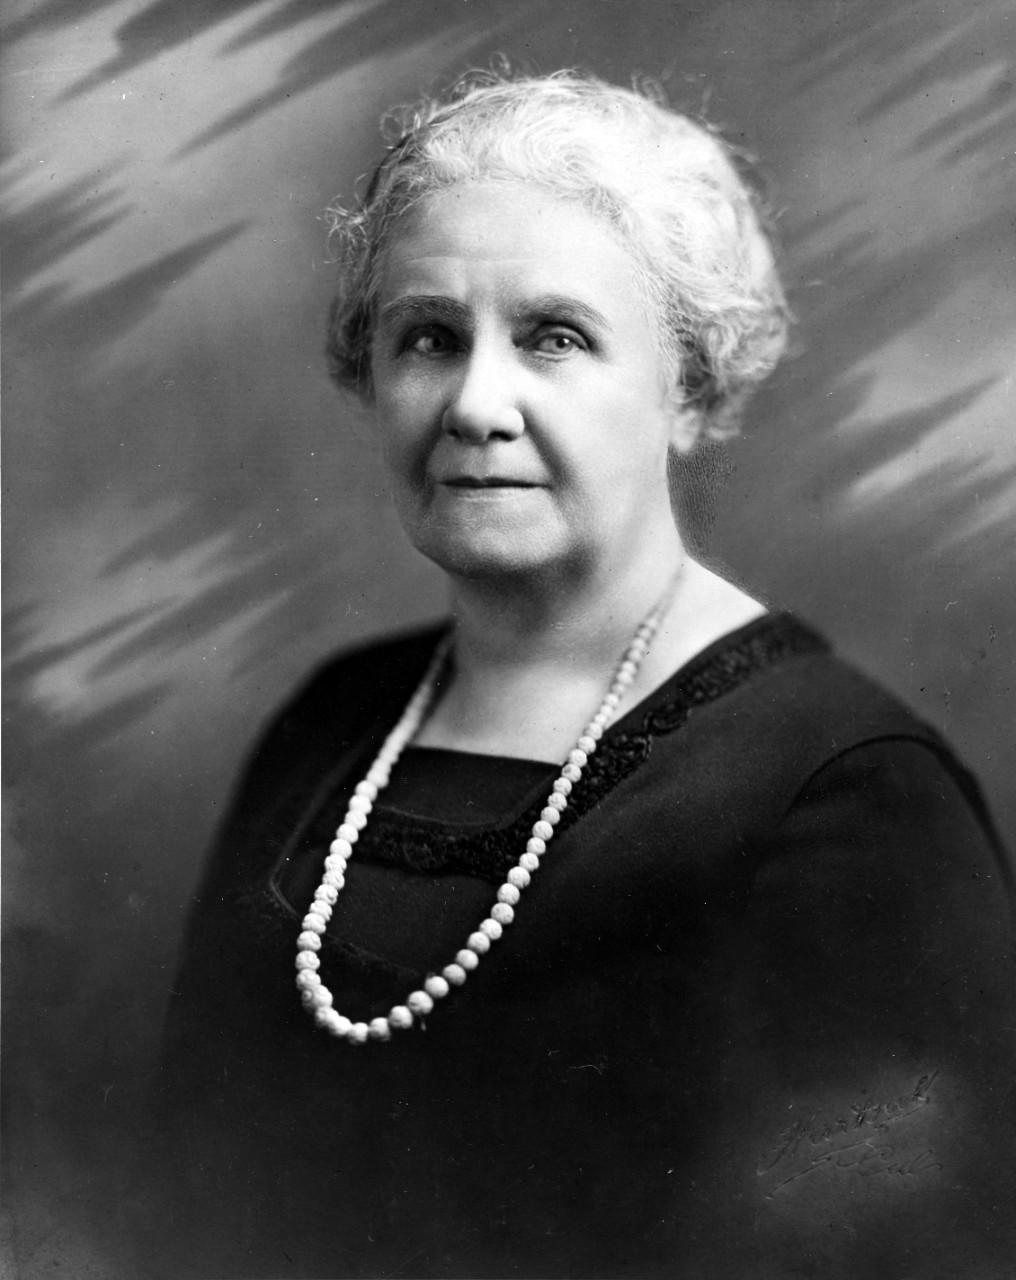 Portrait photo of Esther Hasson, dressed in a black dress with a white necklace